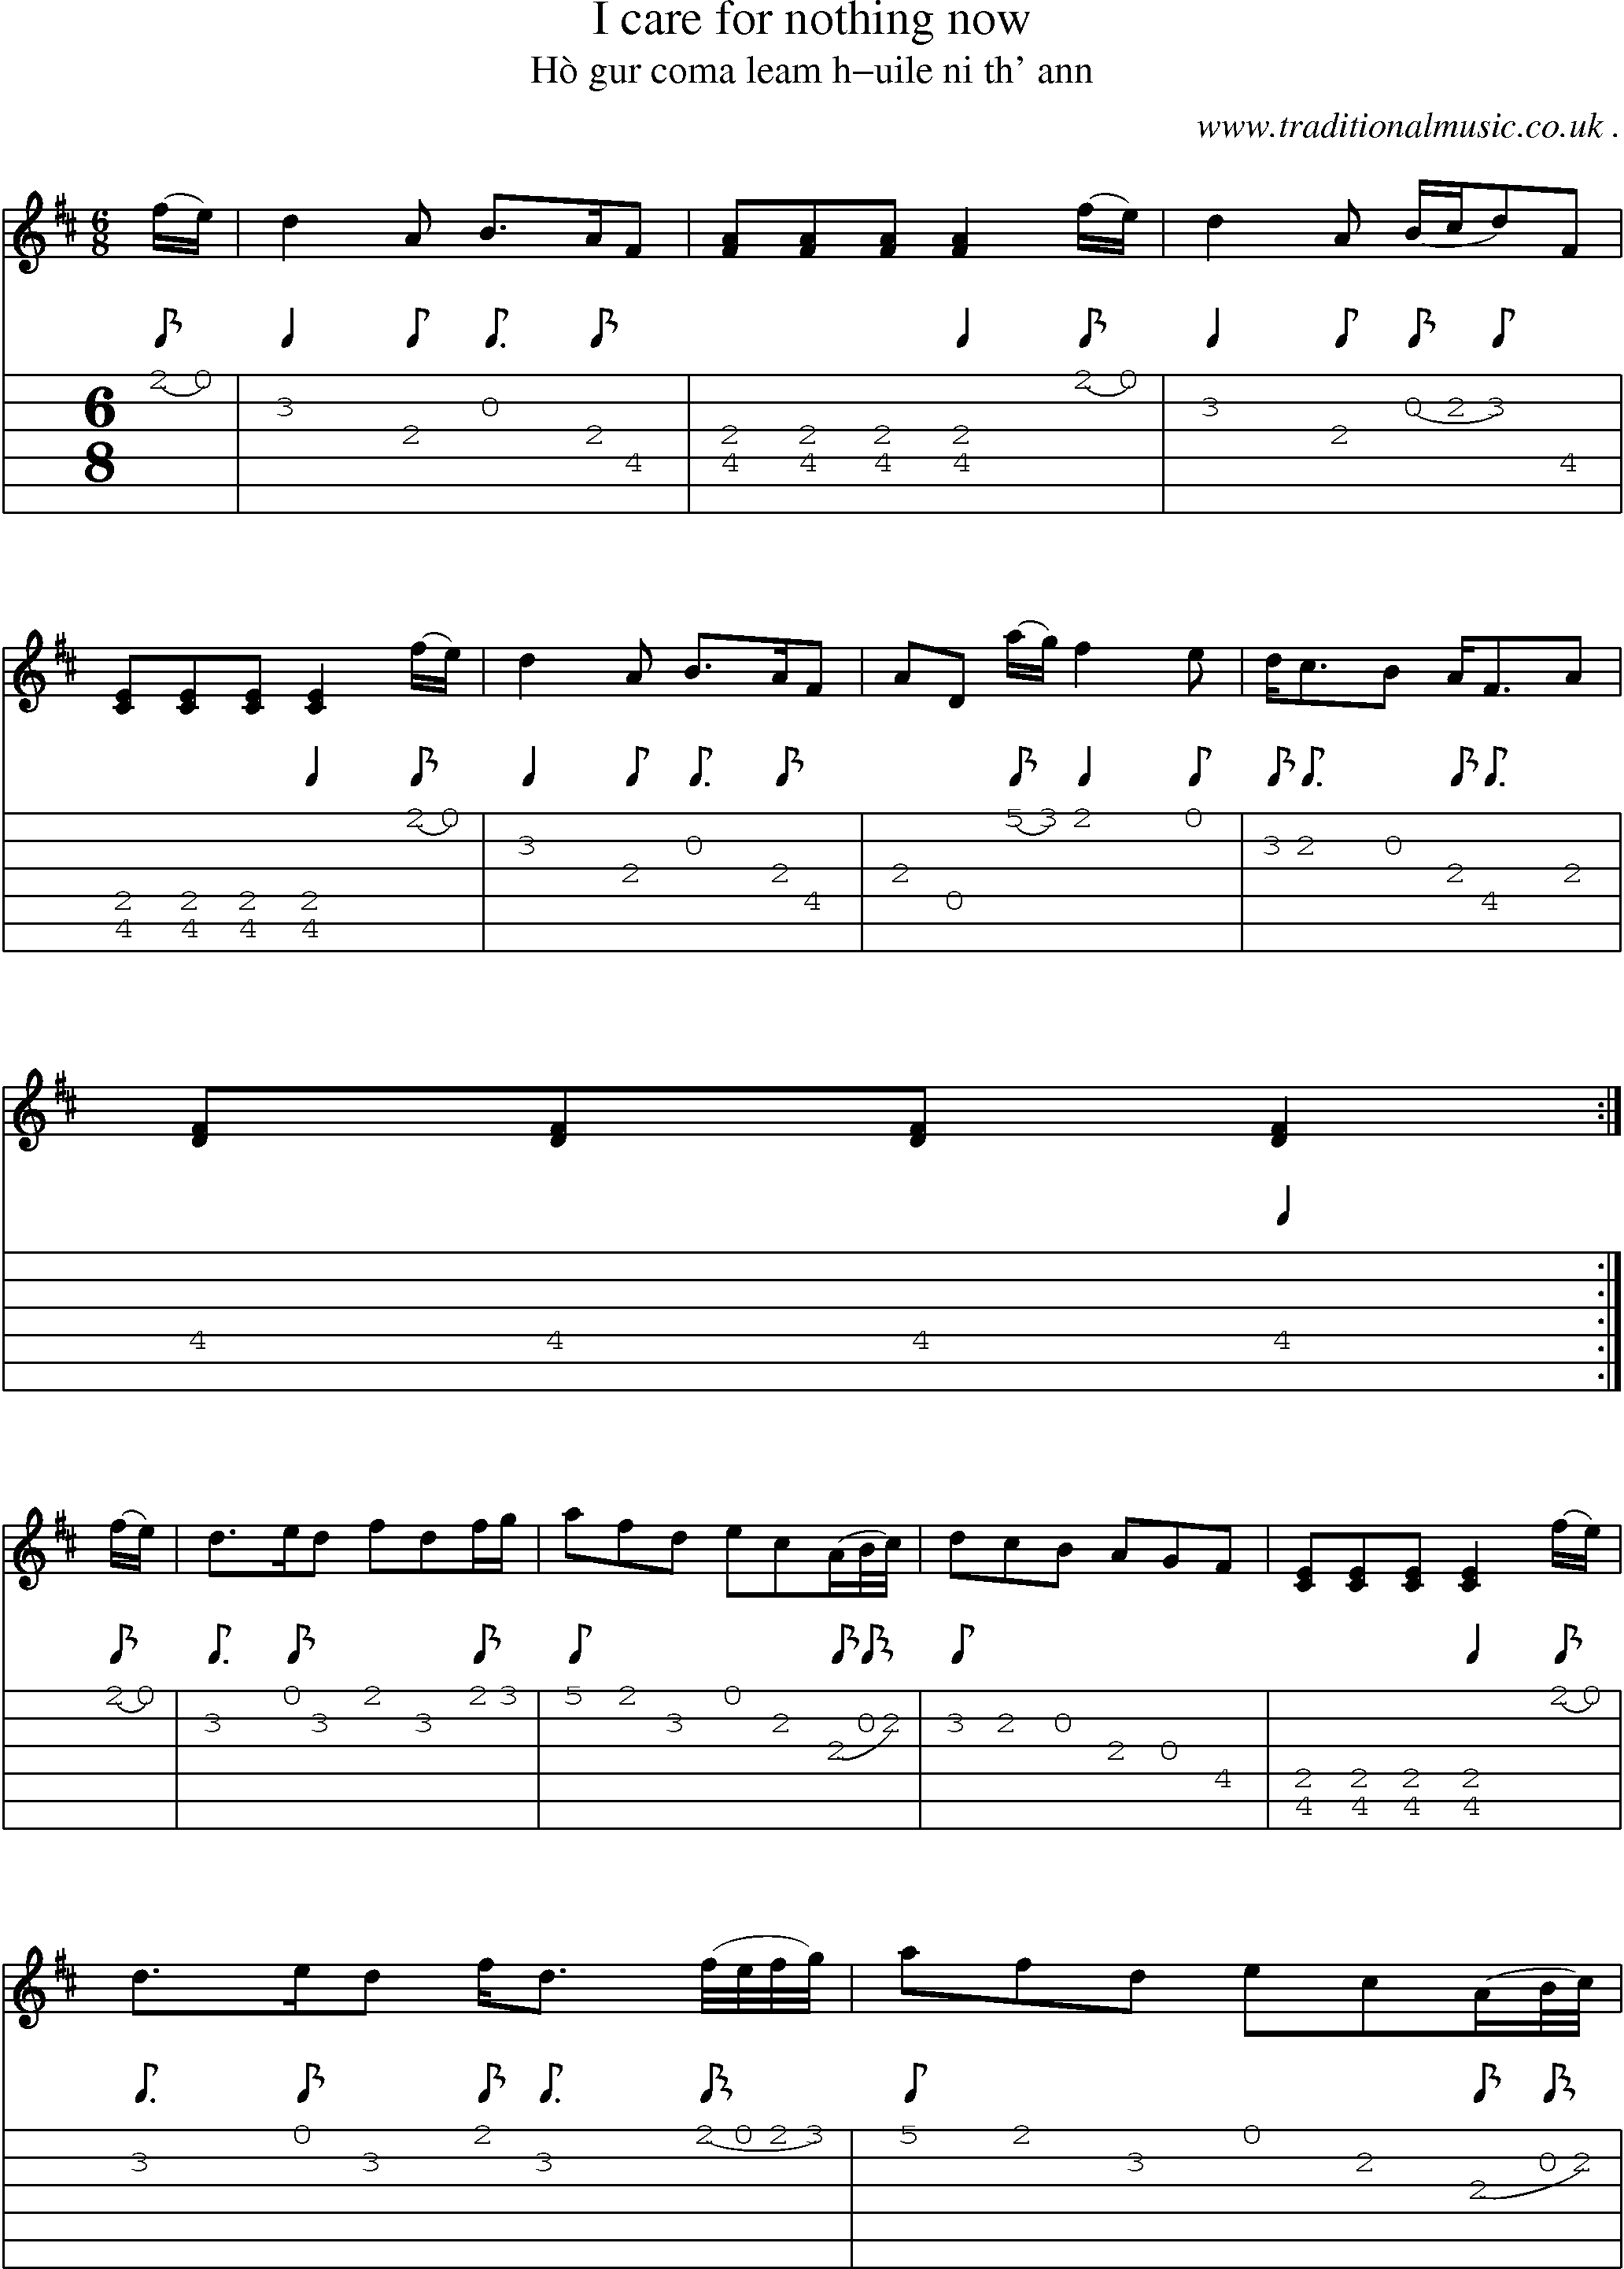 Sheet-music  score, Chords and Guitar Tabs for I Care For Nothing Now